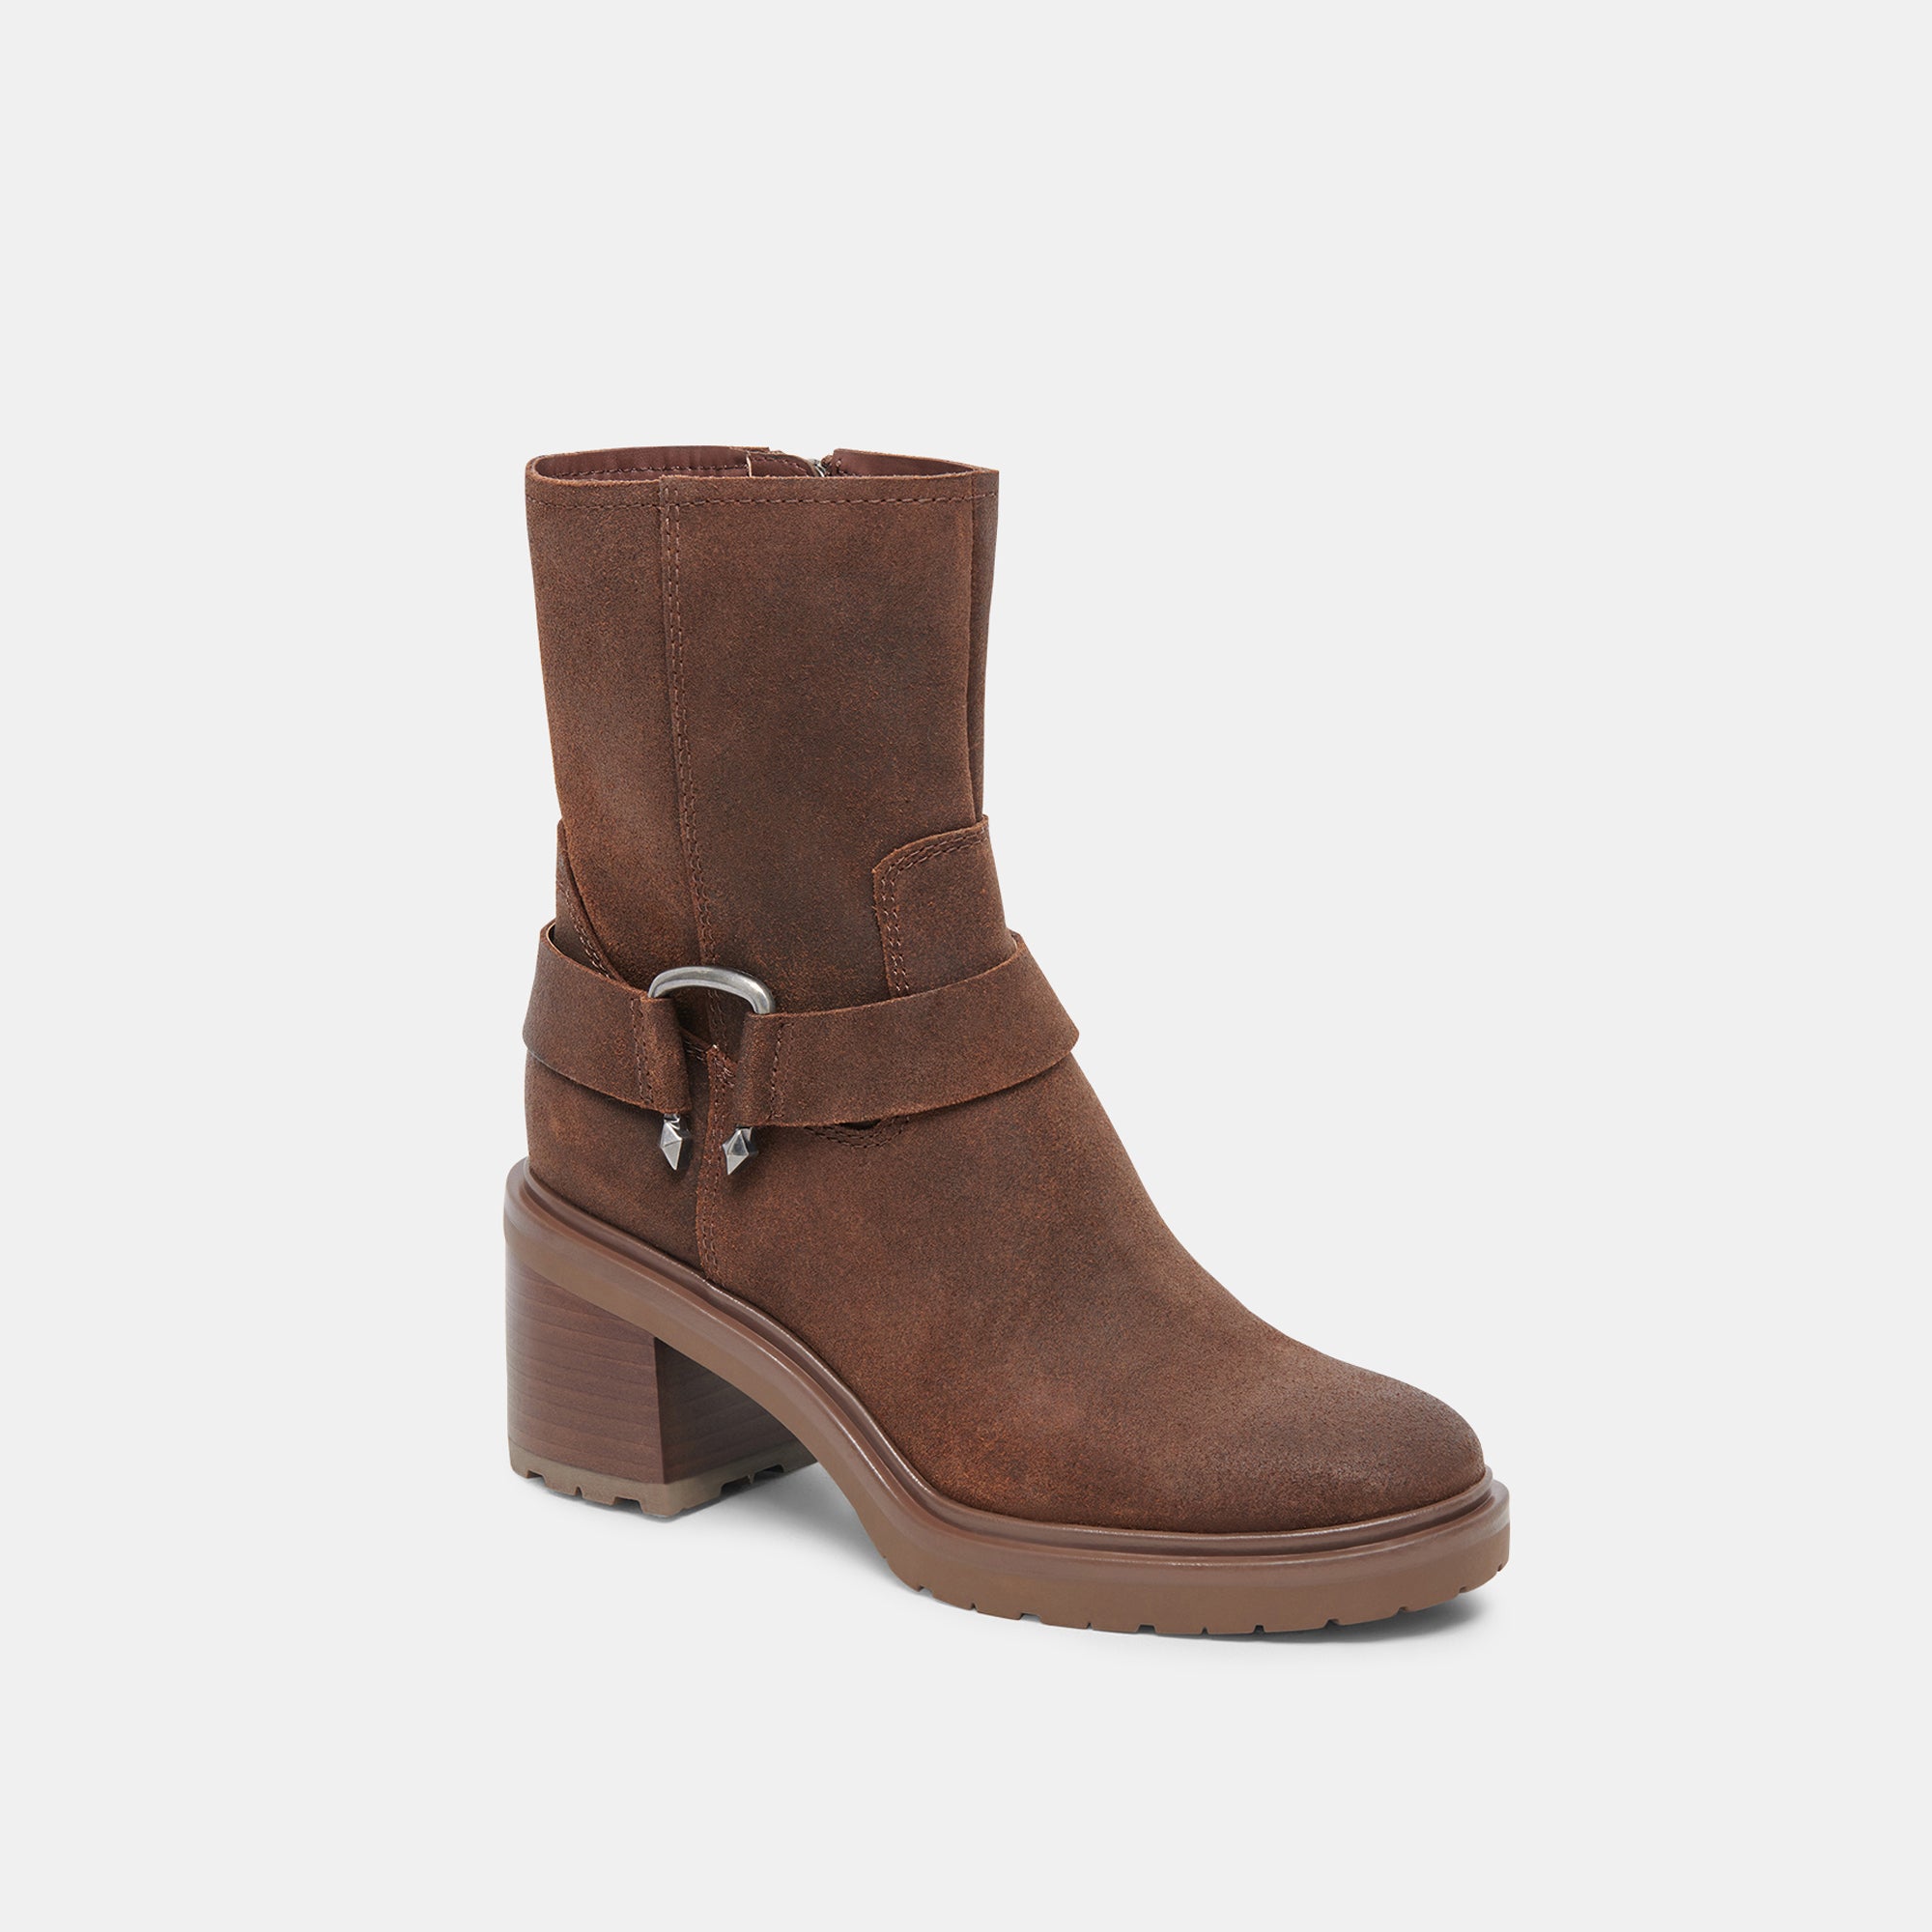 Camros Boots Cocoa Suede | Women's Cocoa Suede Moto Boots – Dolce Vita